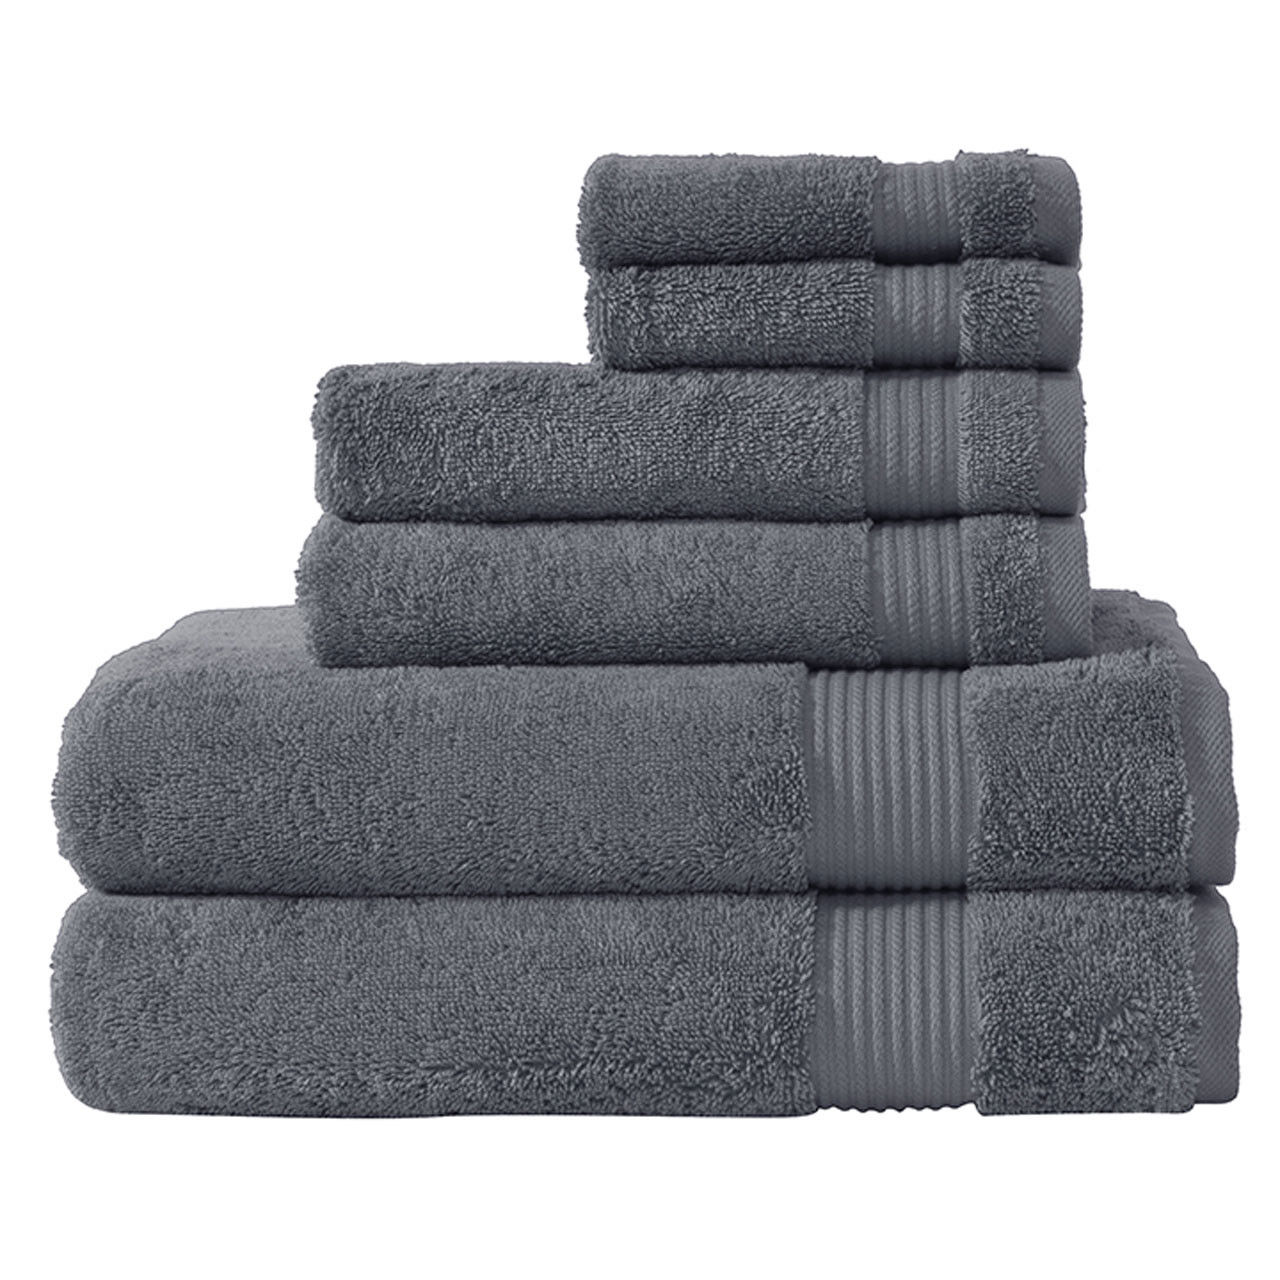 What GSM rating do the gray towels in the Amadeus Turkish Gray Towel Collection have?